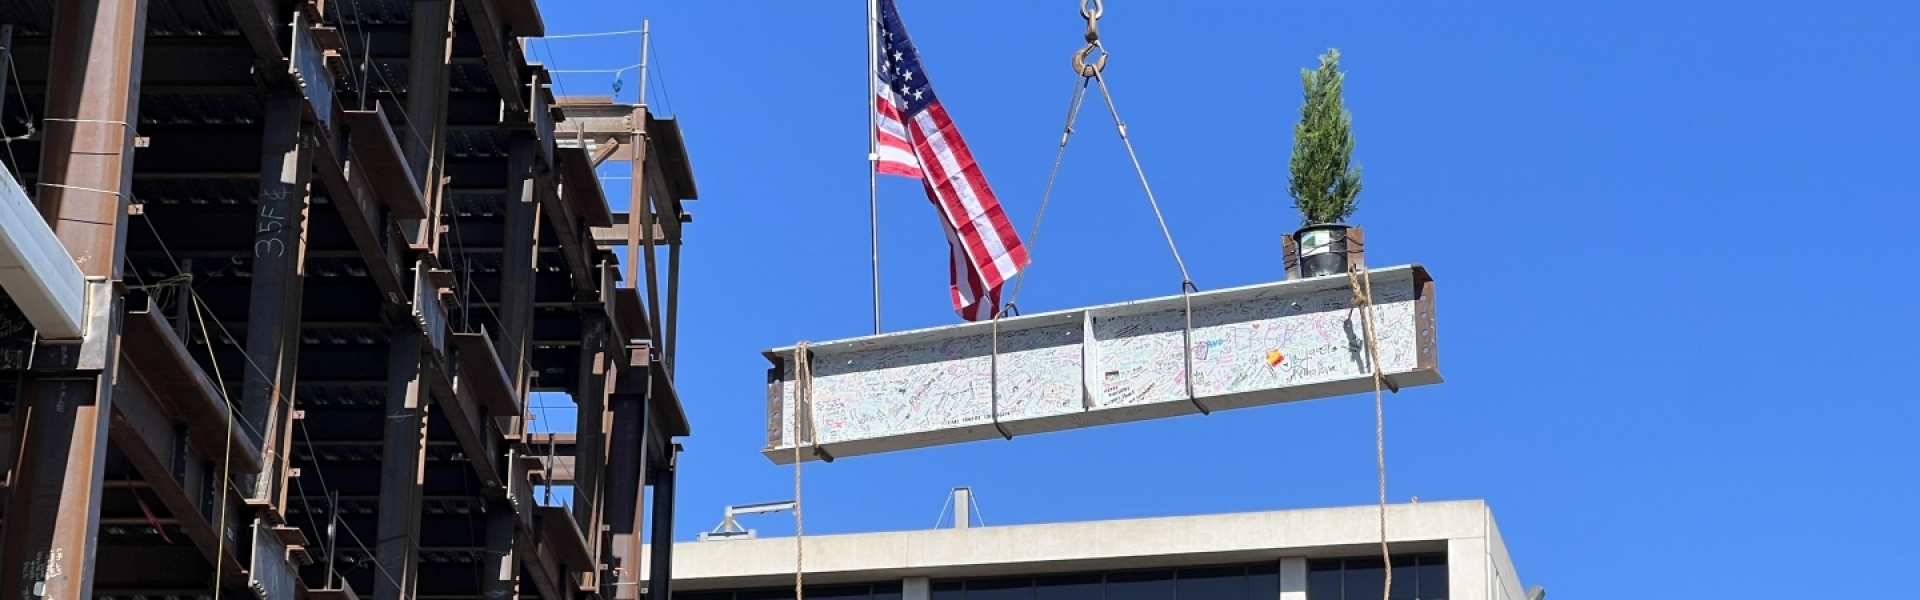 last beam being lifted by crane onto building